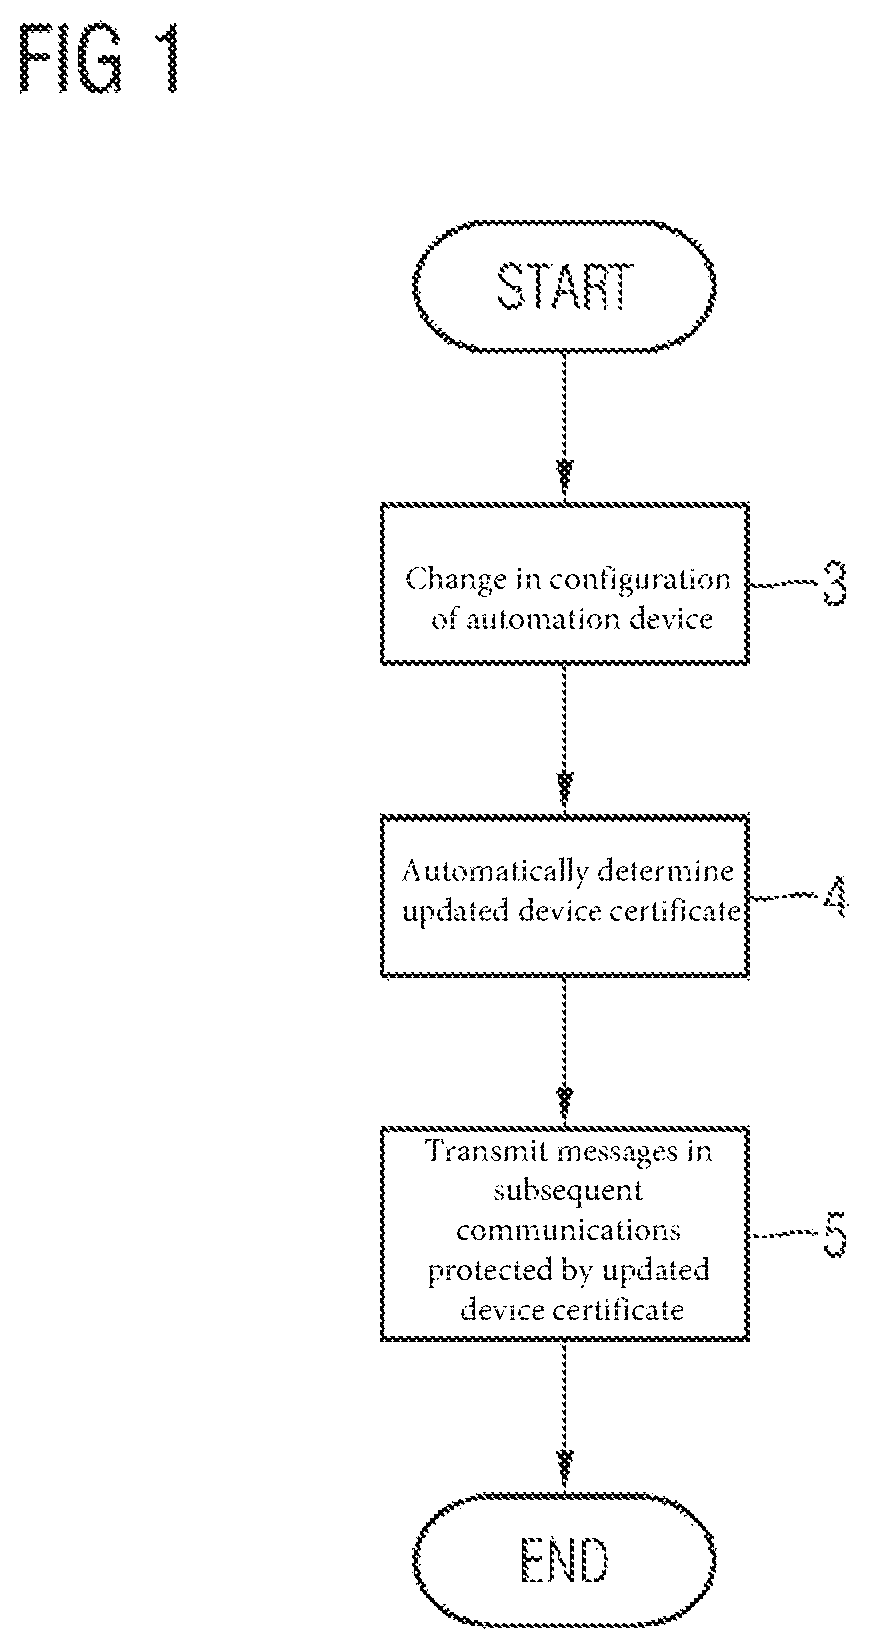 Updating of a digital device certificate of an automation device